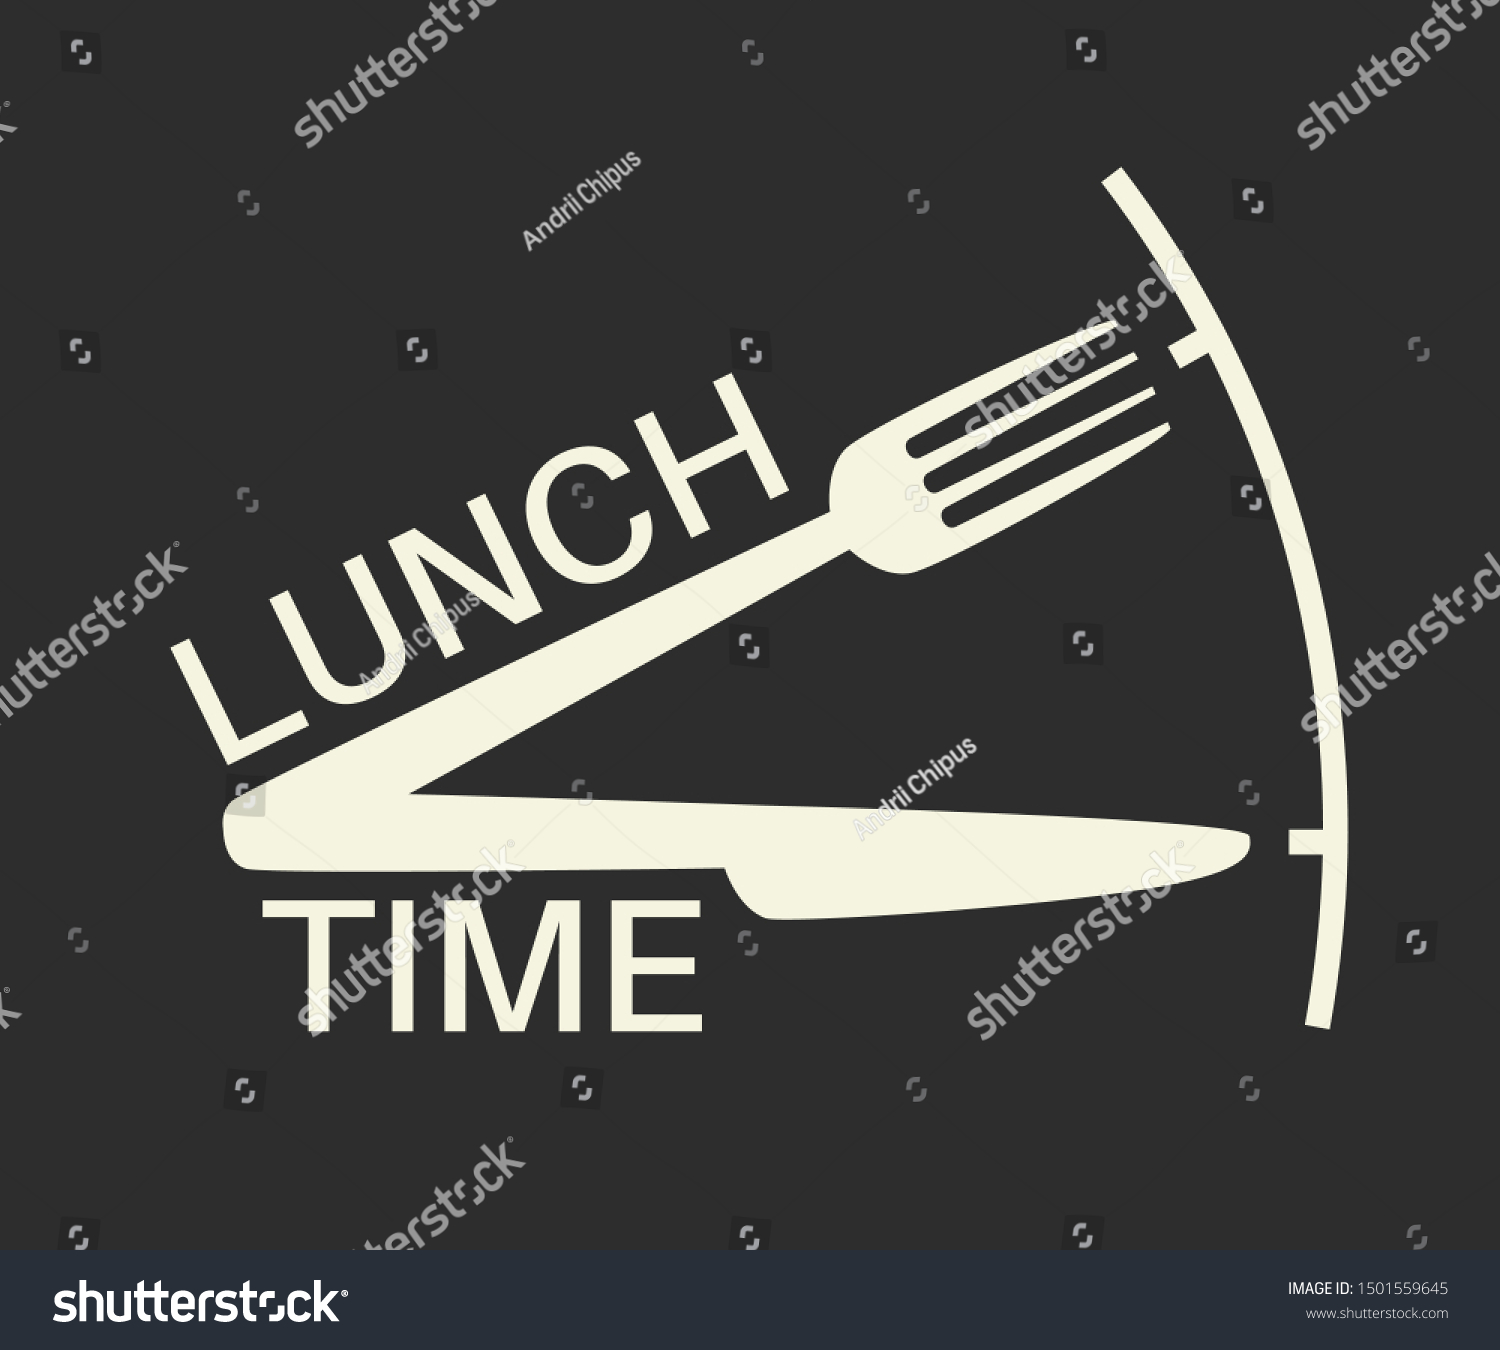 Lunch time text with fork and knife on black background. Lunch break Applicable as part of restaurant, cafe lunch menu. Vector illustration